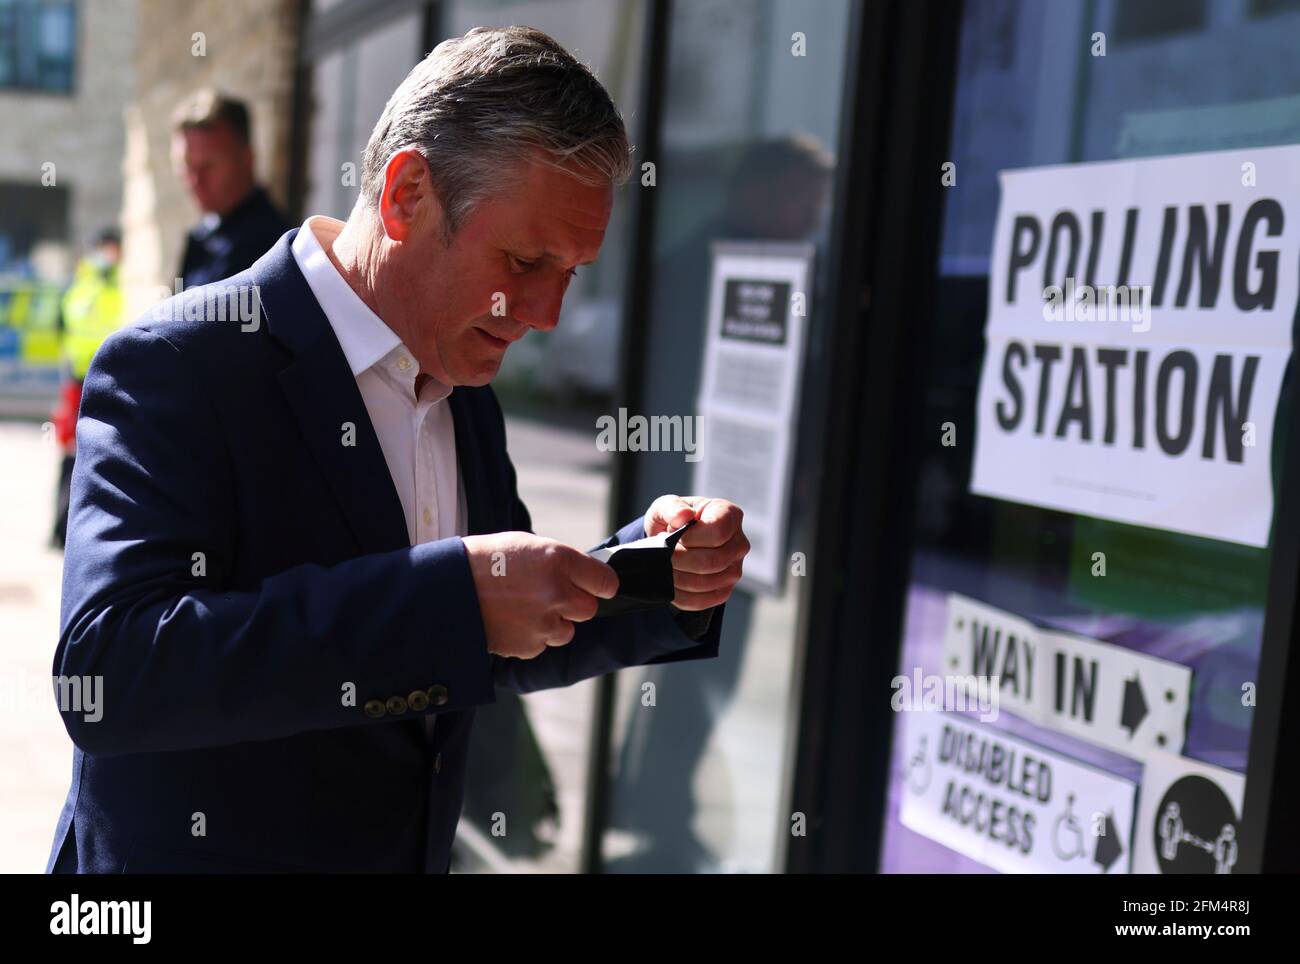 Britain's Labour Party leader Keir Starmer puts on a protective mask as he arrives at a polling station to vote during local elections, in London, Britain May 6, 2021. REUTERS/Tom Nicholson Stock Photo